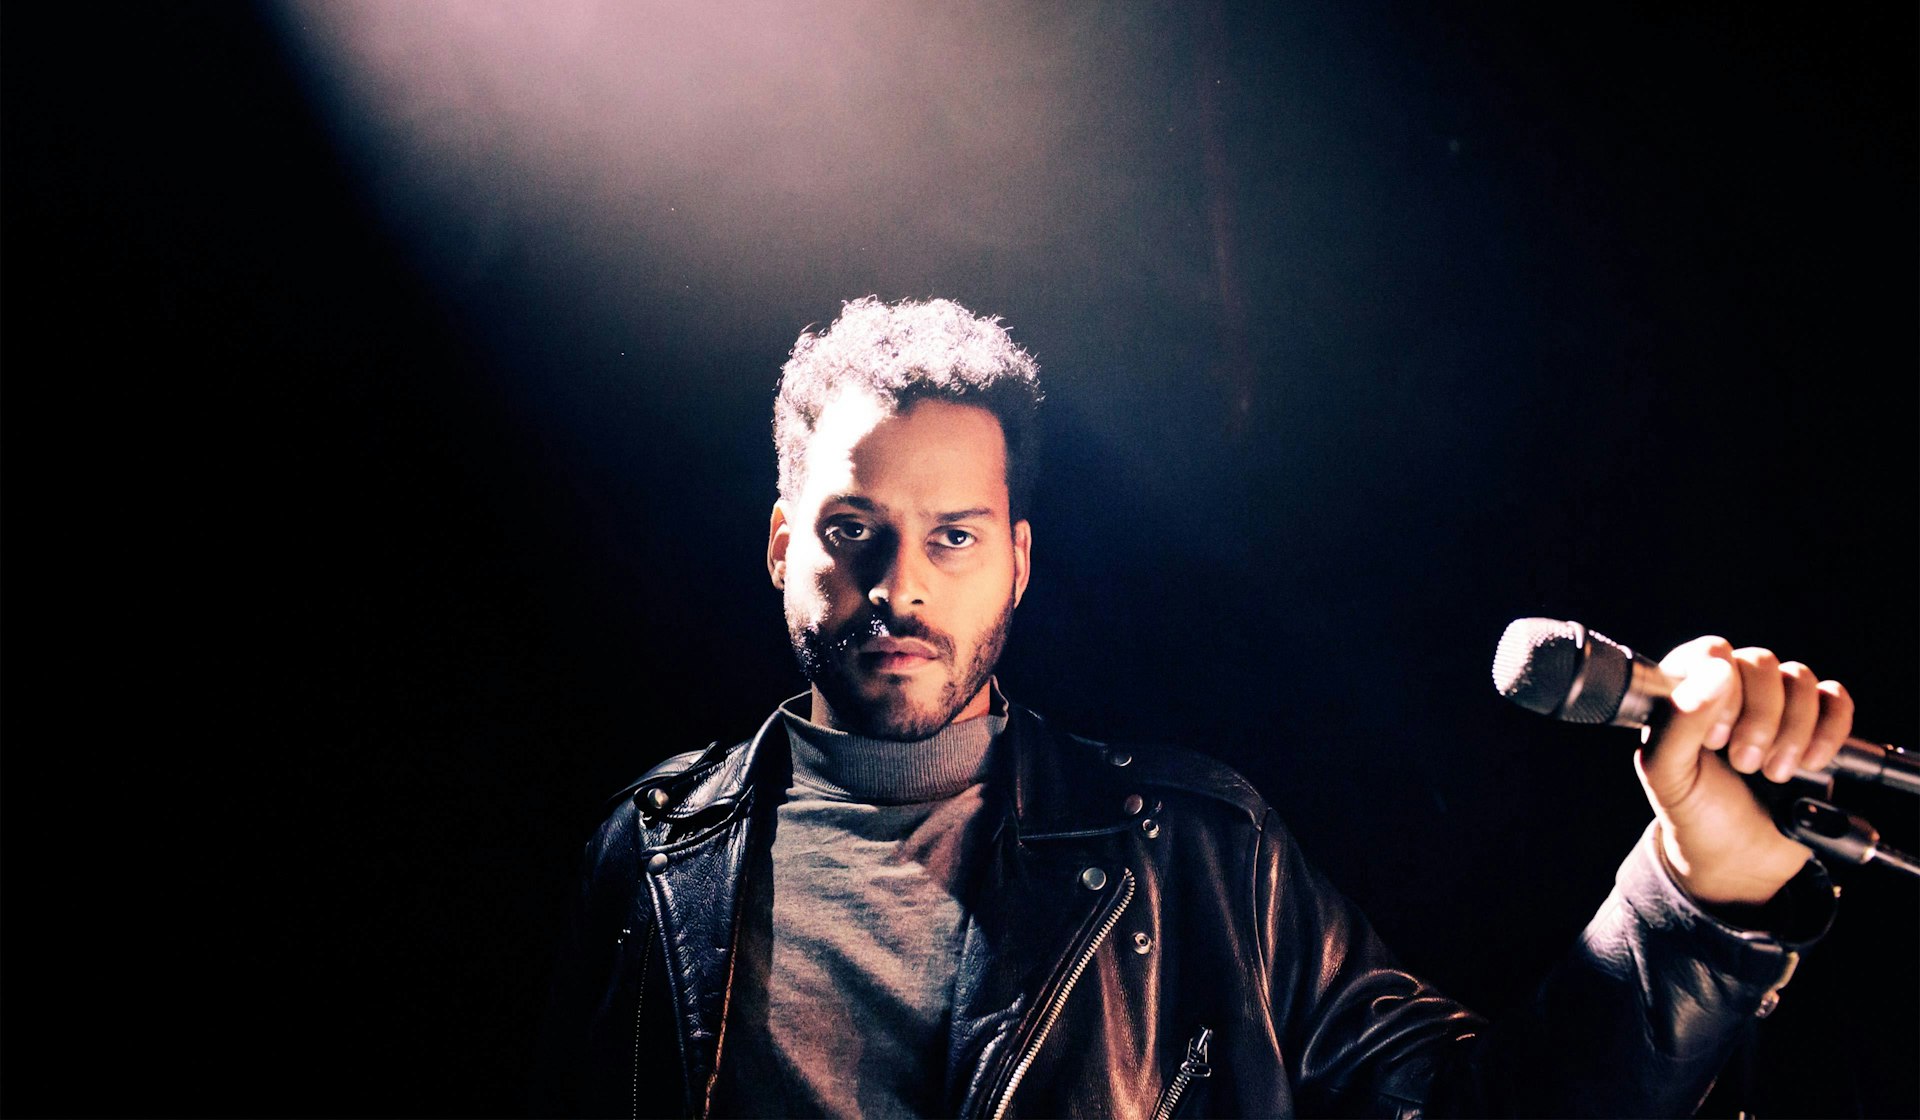 Twin Shadow finds musical inspiration in his most uncomfortable moments